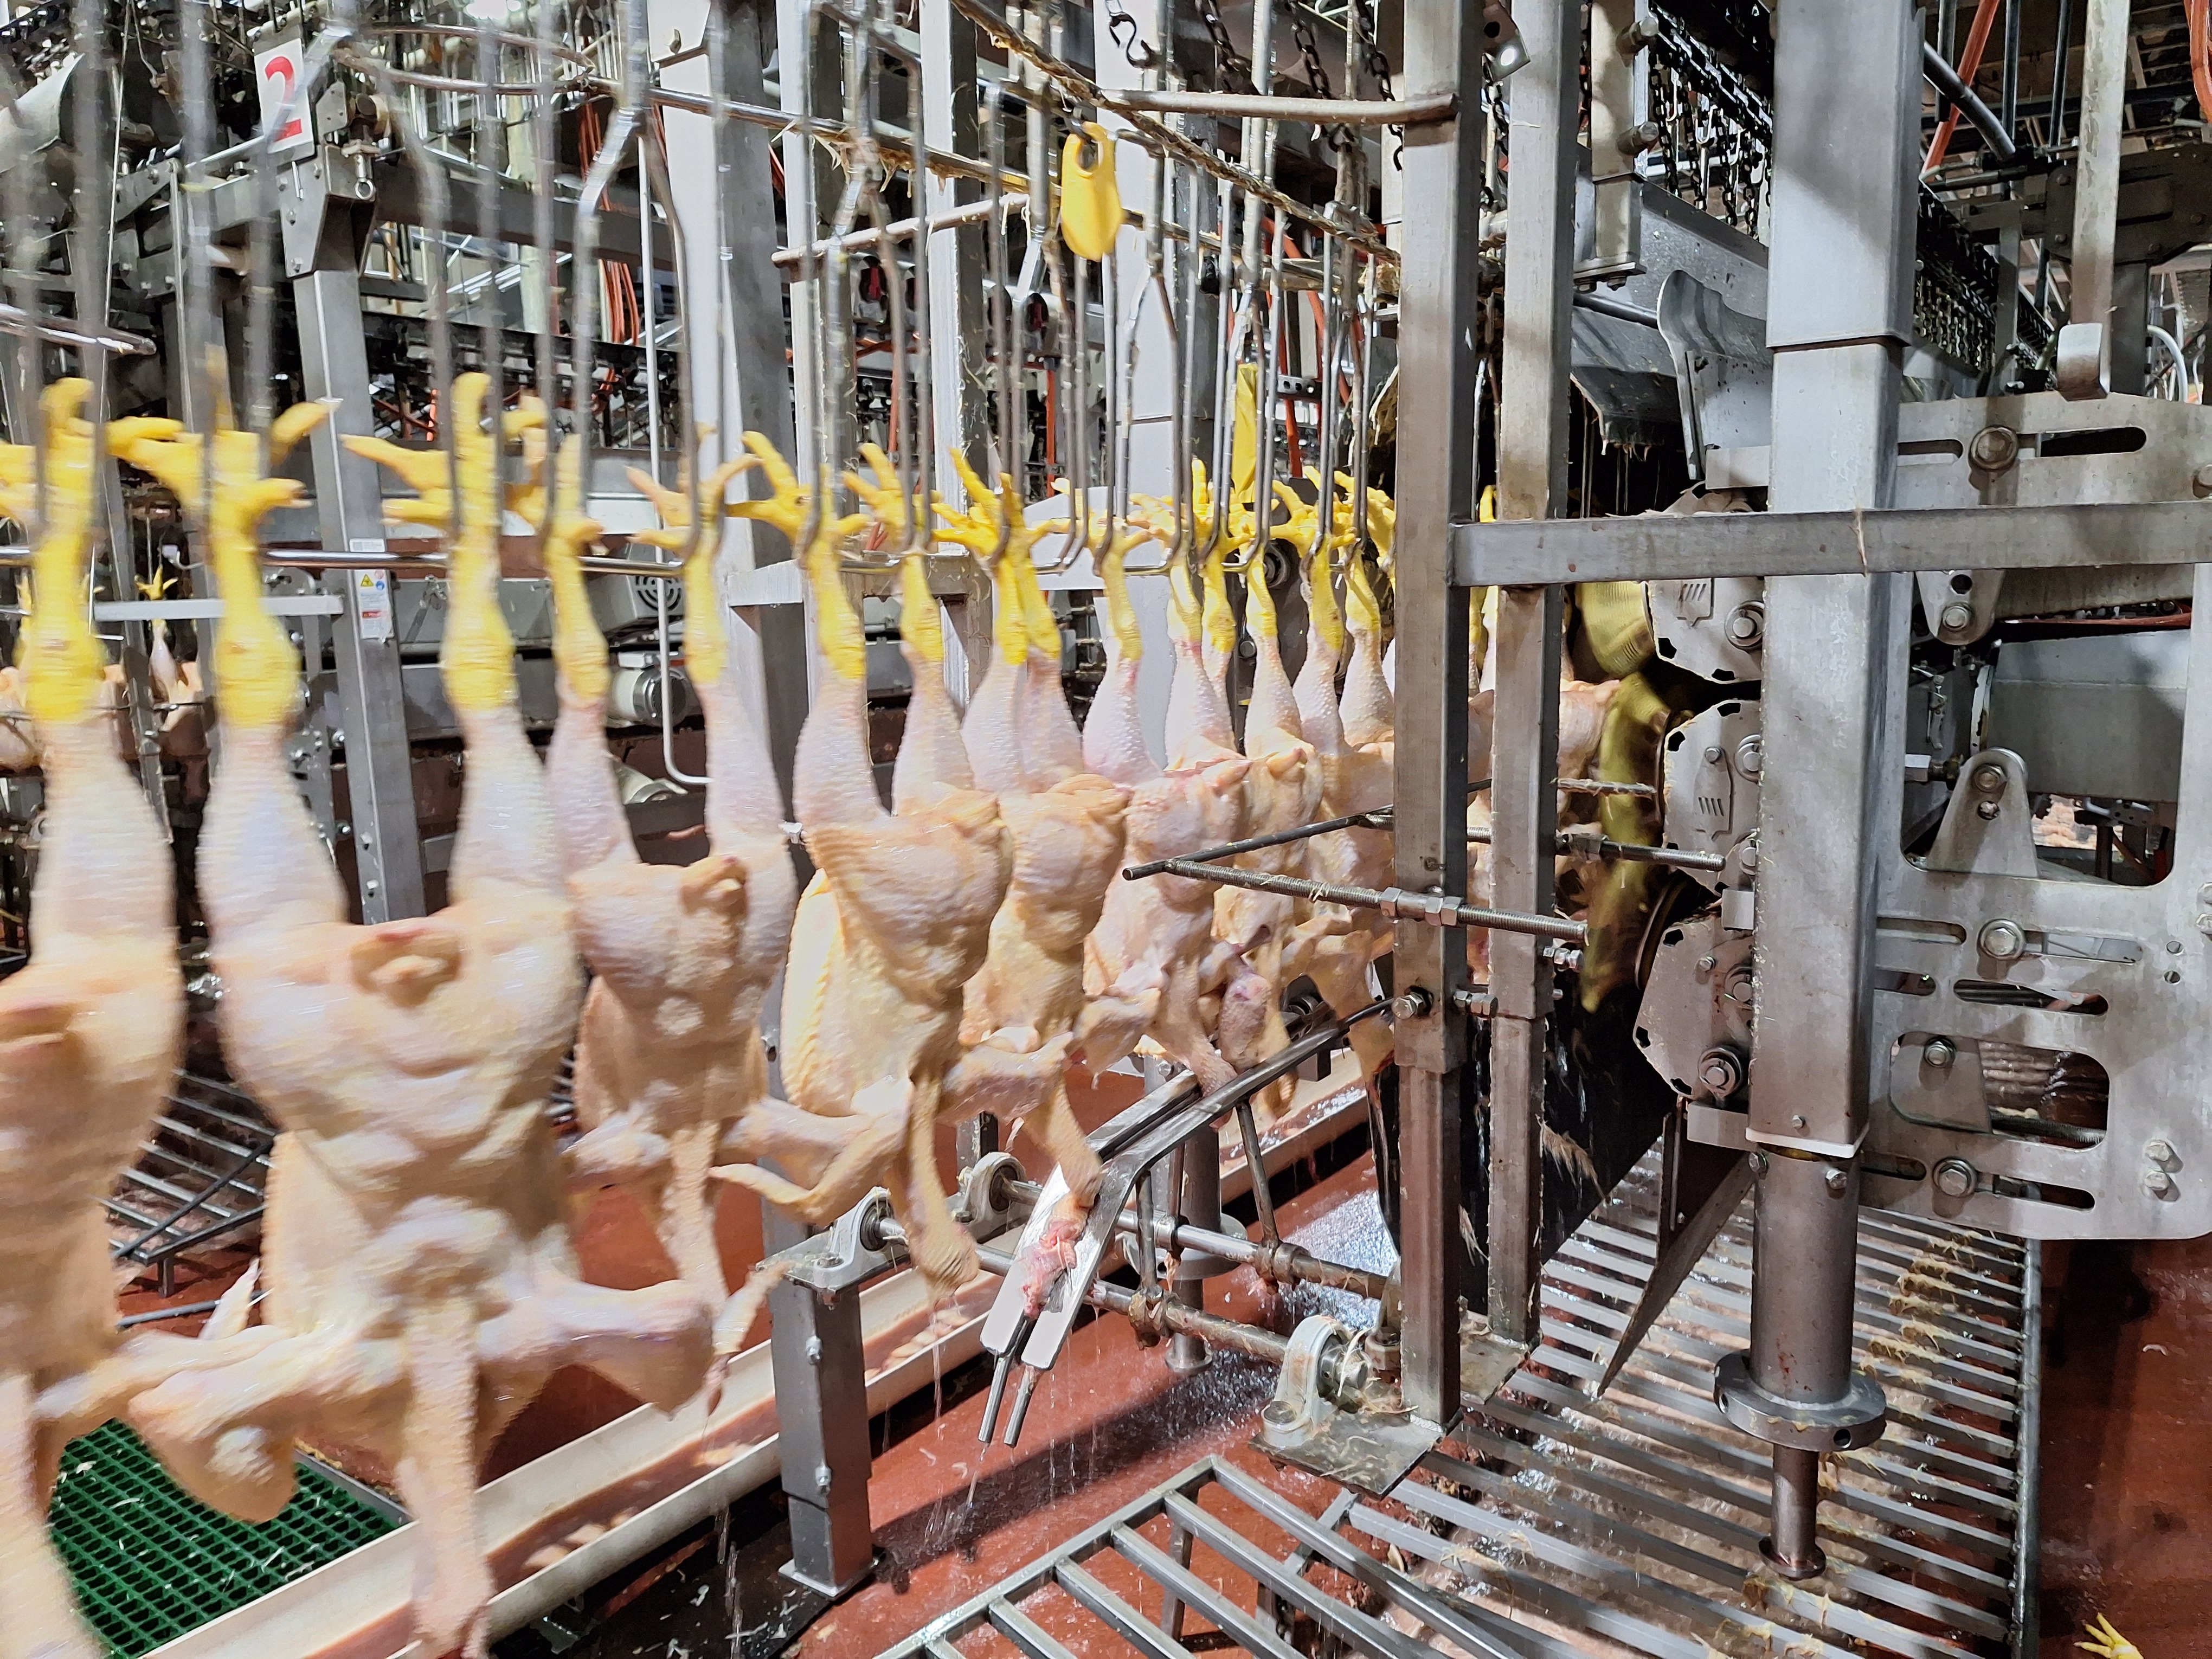 Chicken disassembly line featuring plucked chickens hanging ready for processing, photo Martin Aucoin